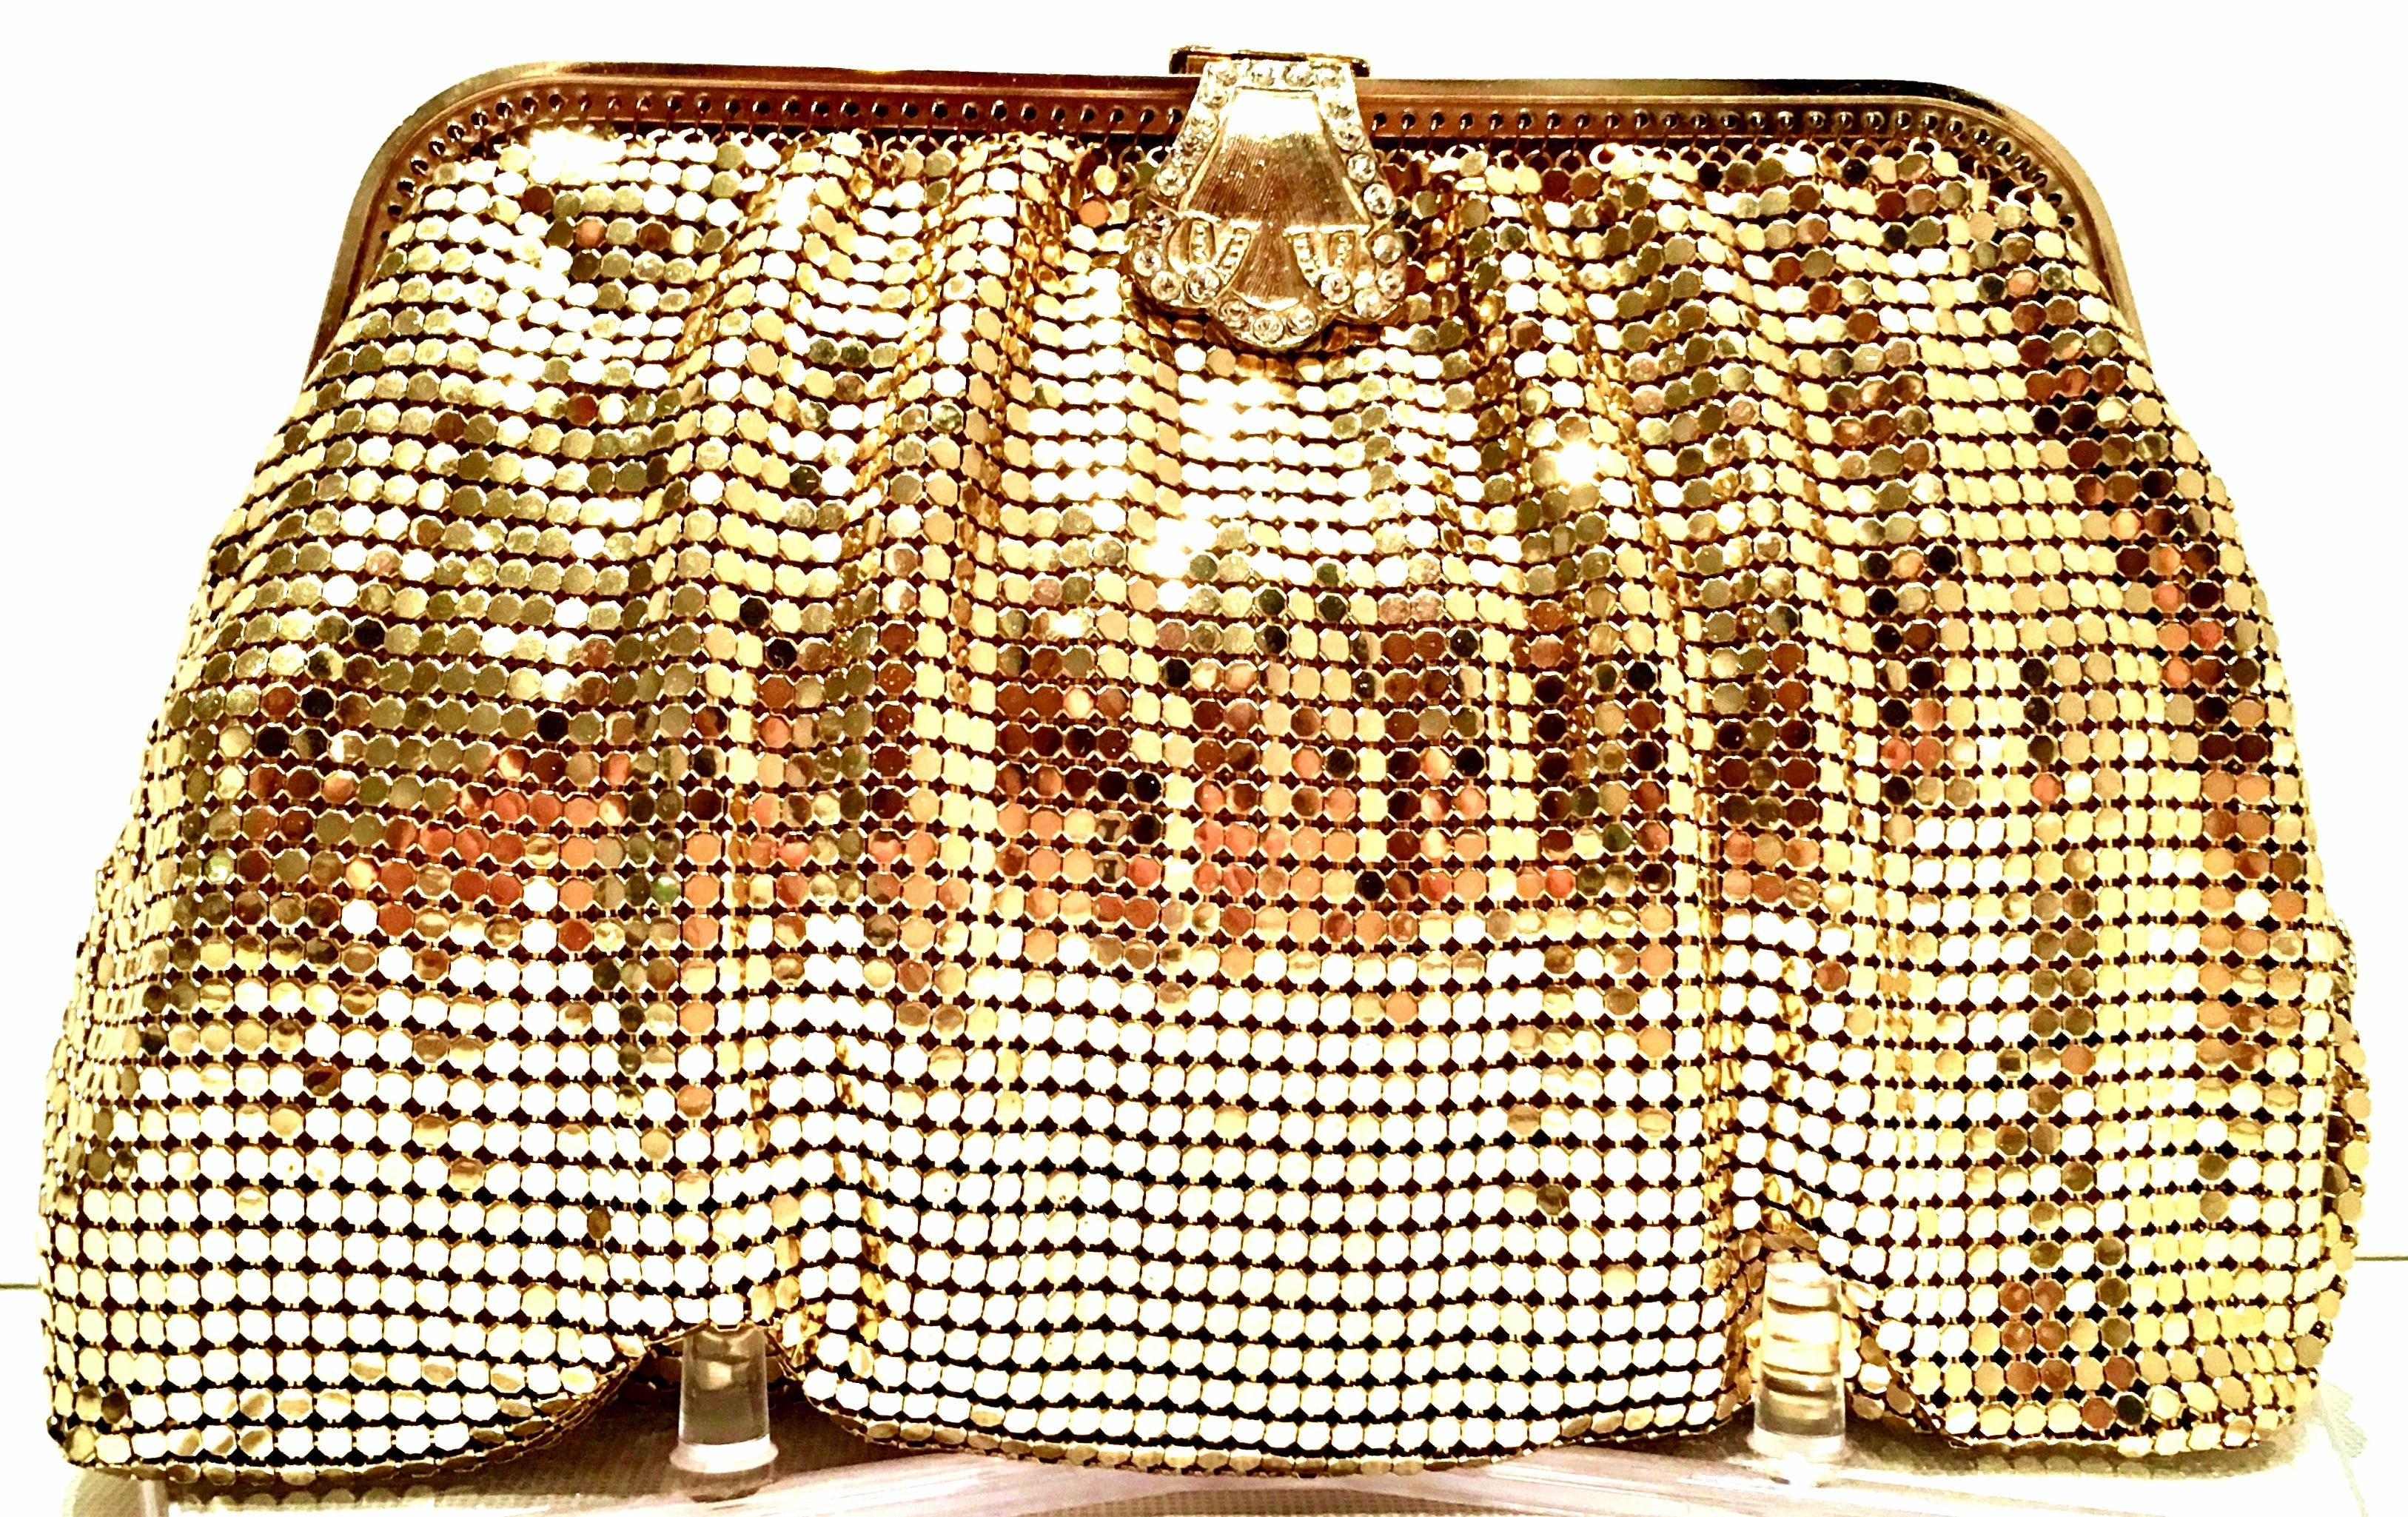 20th Century Gold Metal Mesh & Swarovksi Crystal Evening Bag By, Whiting & Davis In Good Condition For Sale In West Palm Beach, FL